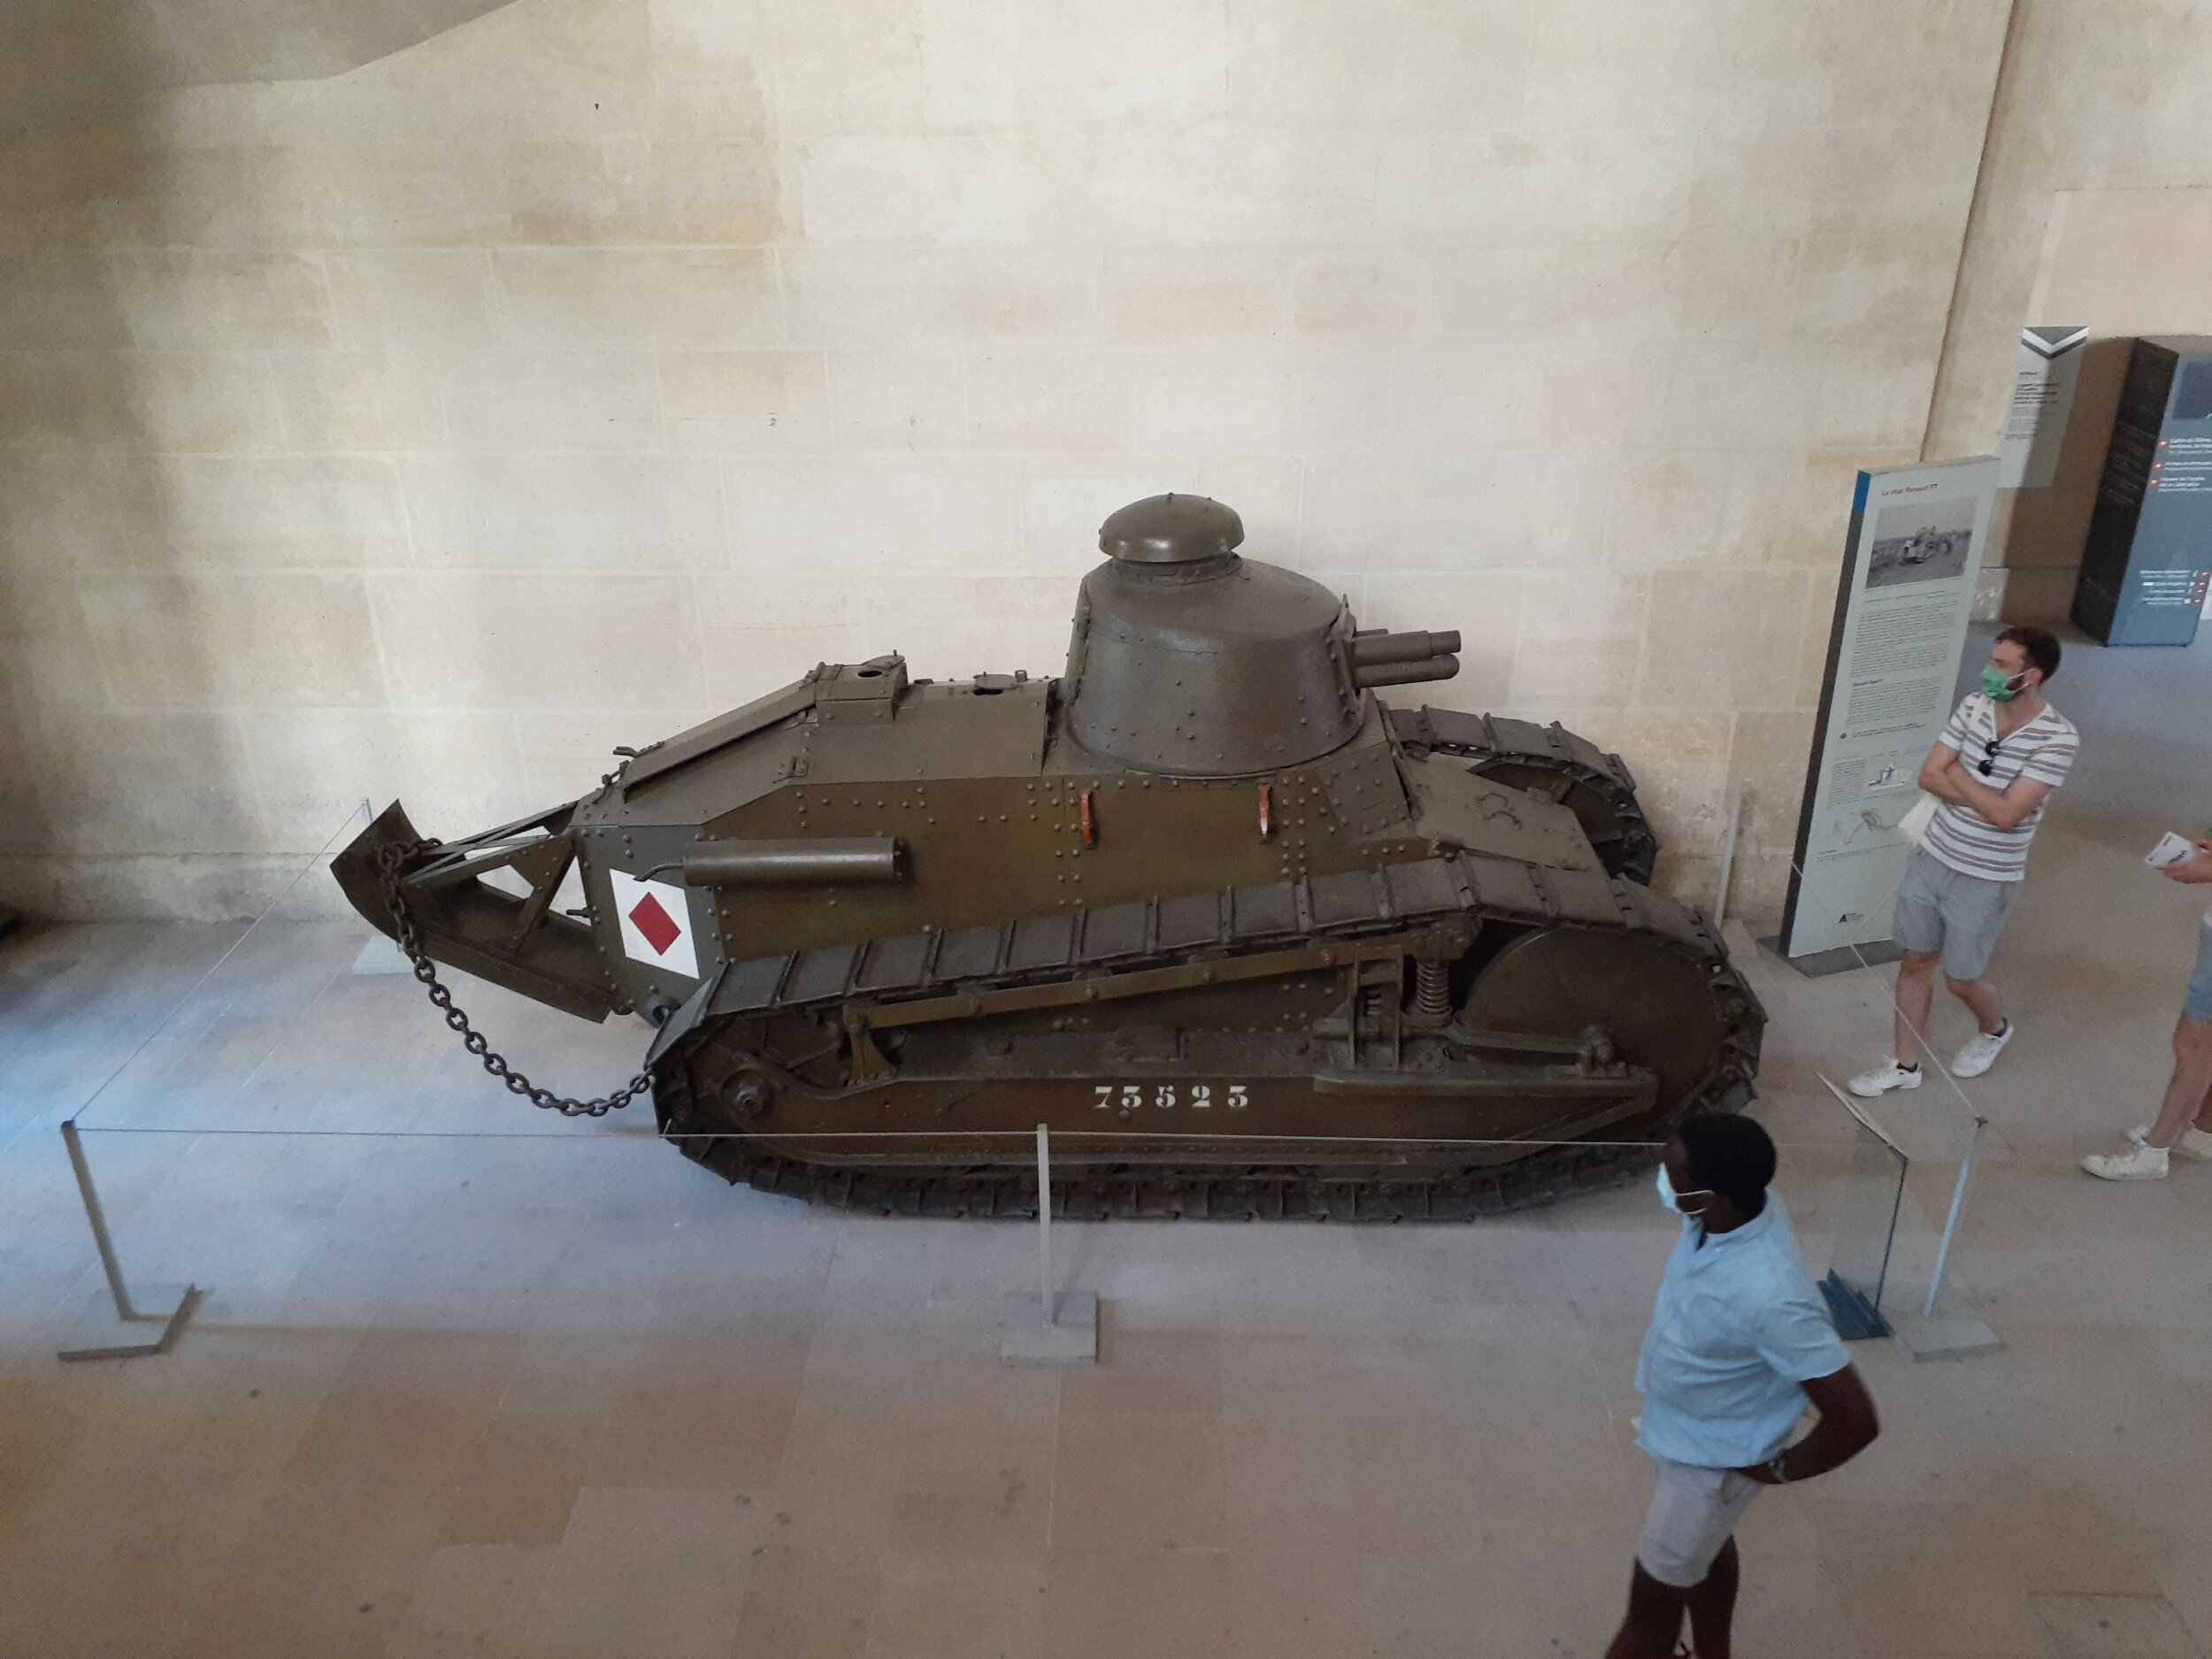 Invalides Army Museum